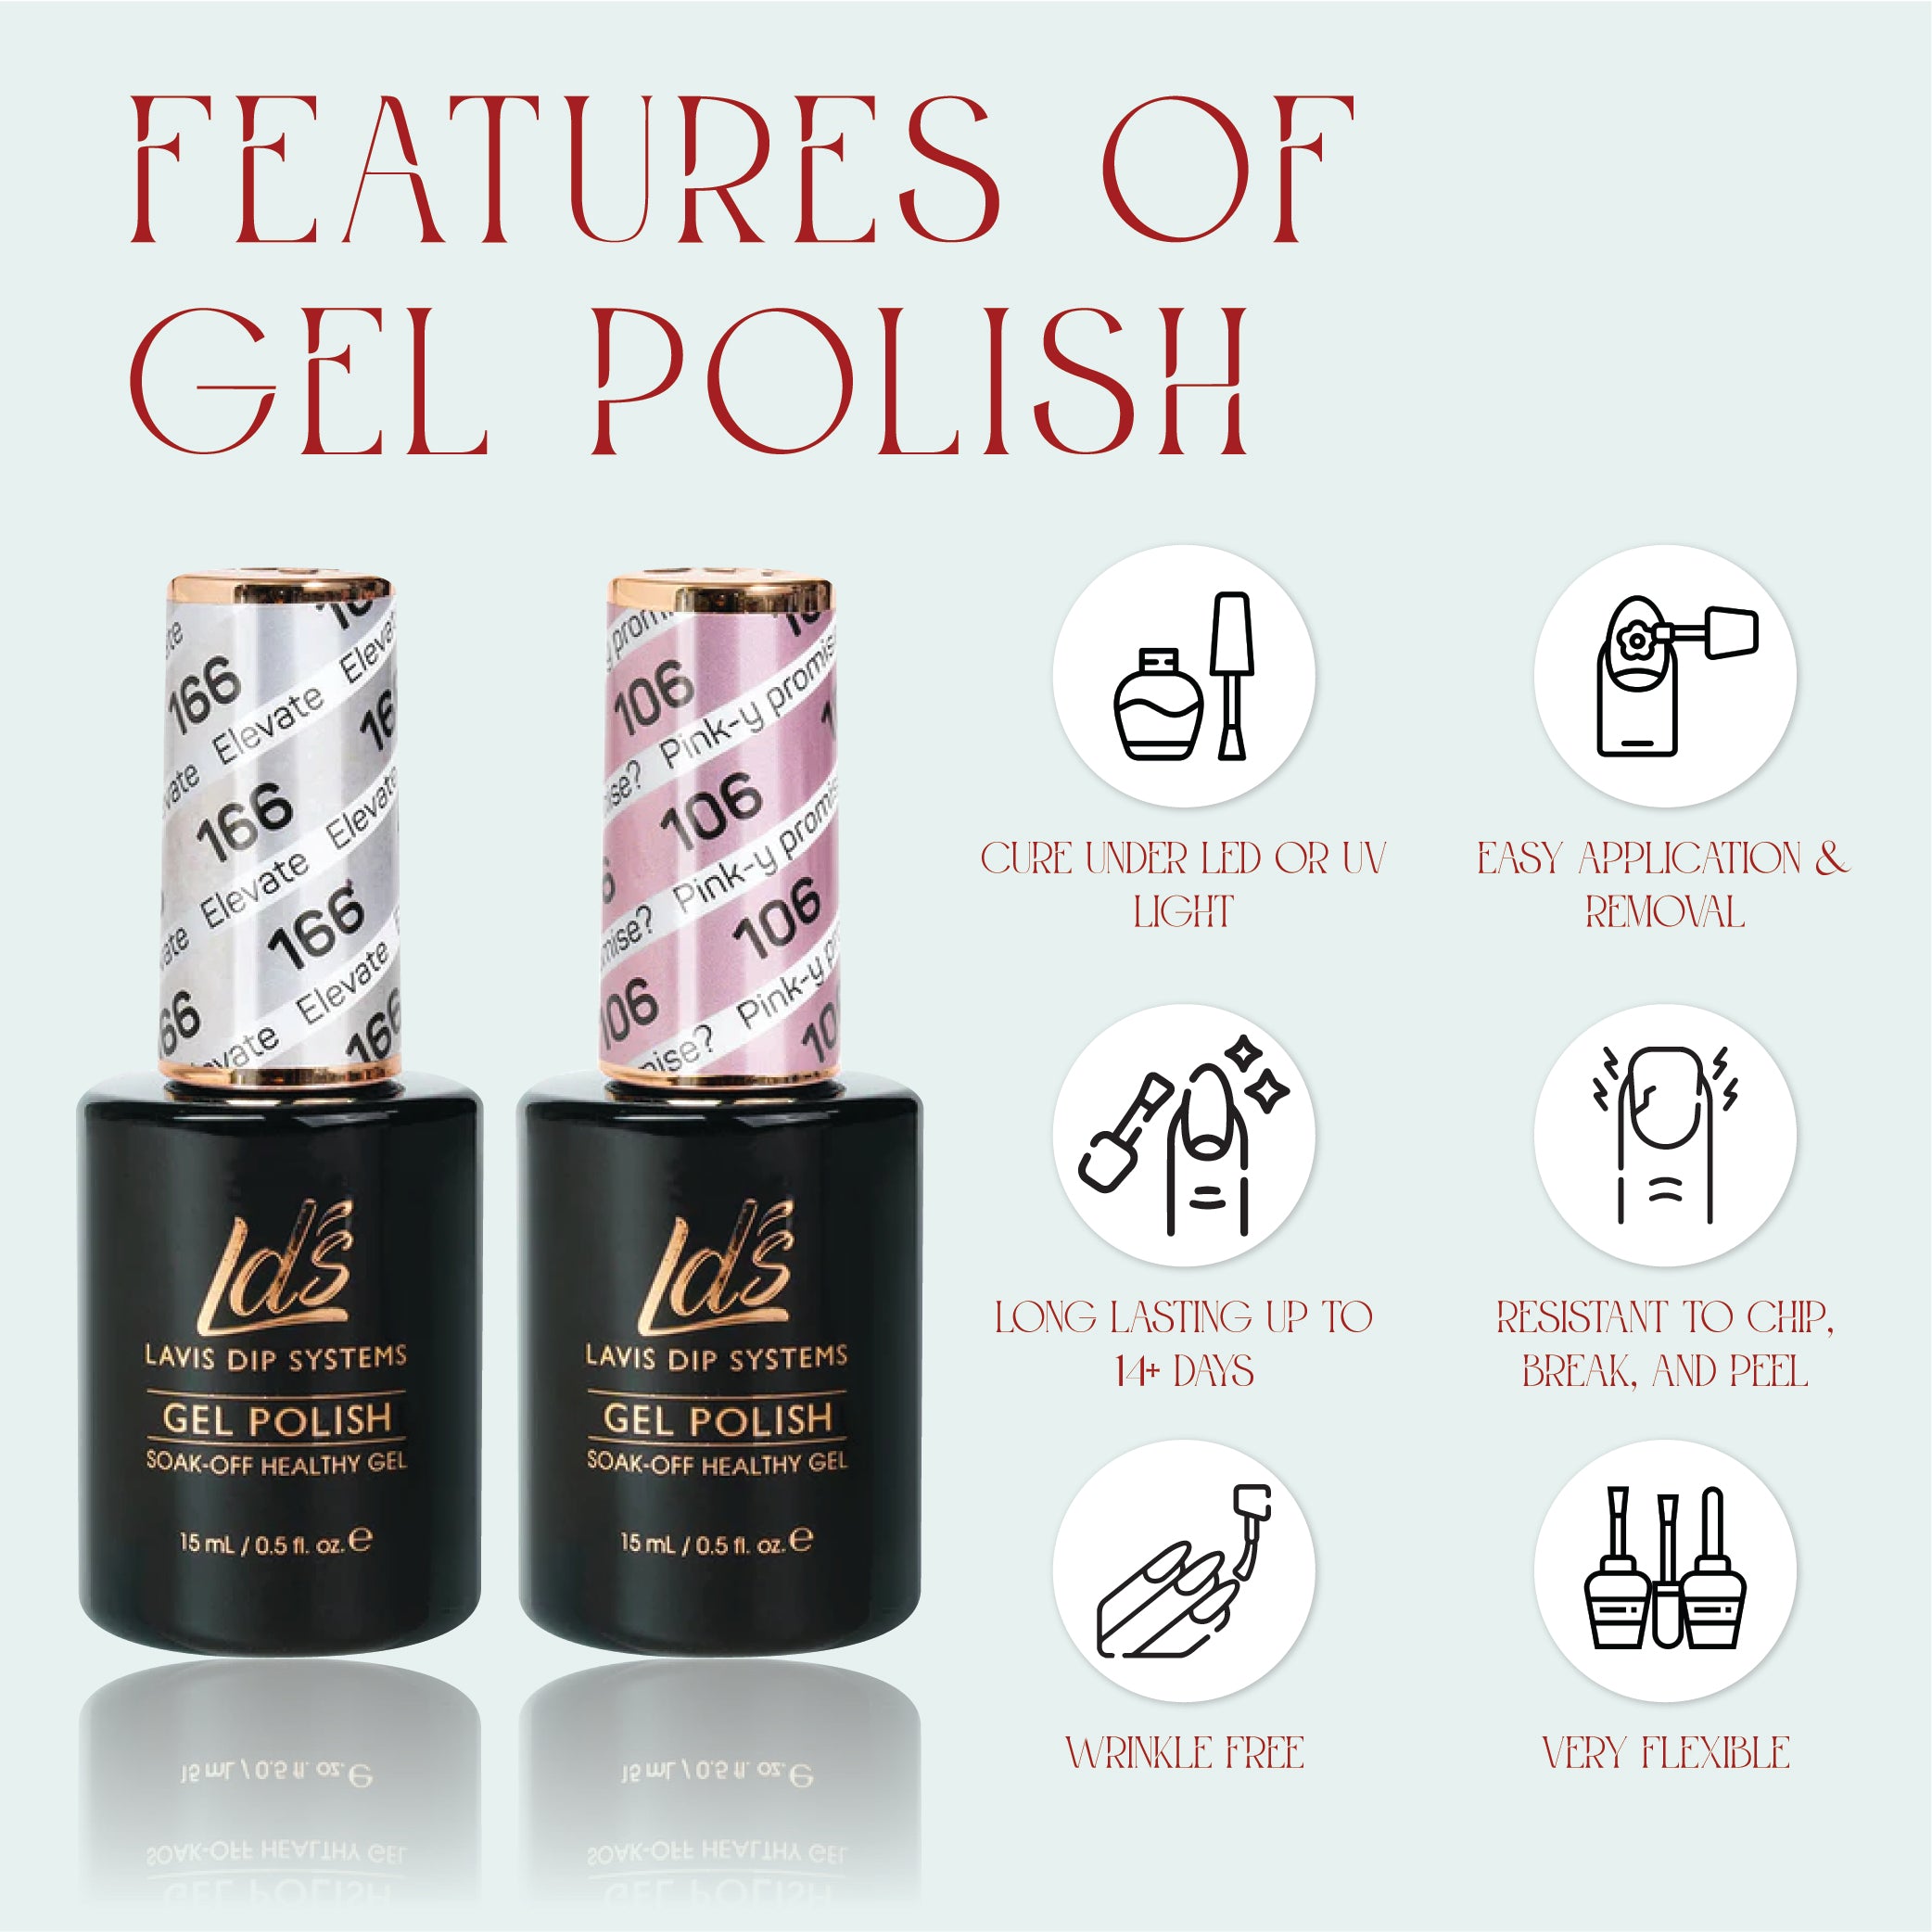 LDS 154 Too Glam To Give A Damn - LDS Healthy Gel Polish & Matching Nail Lacquer Duo Set - 0.5oz